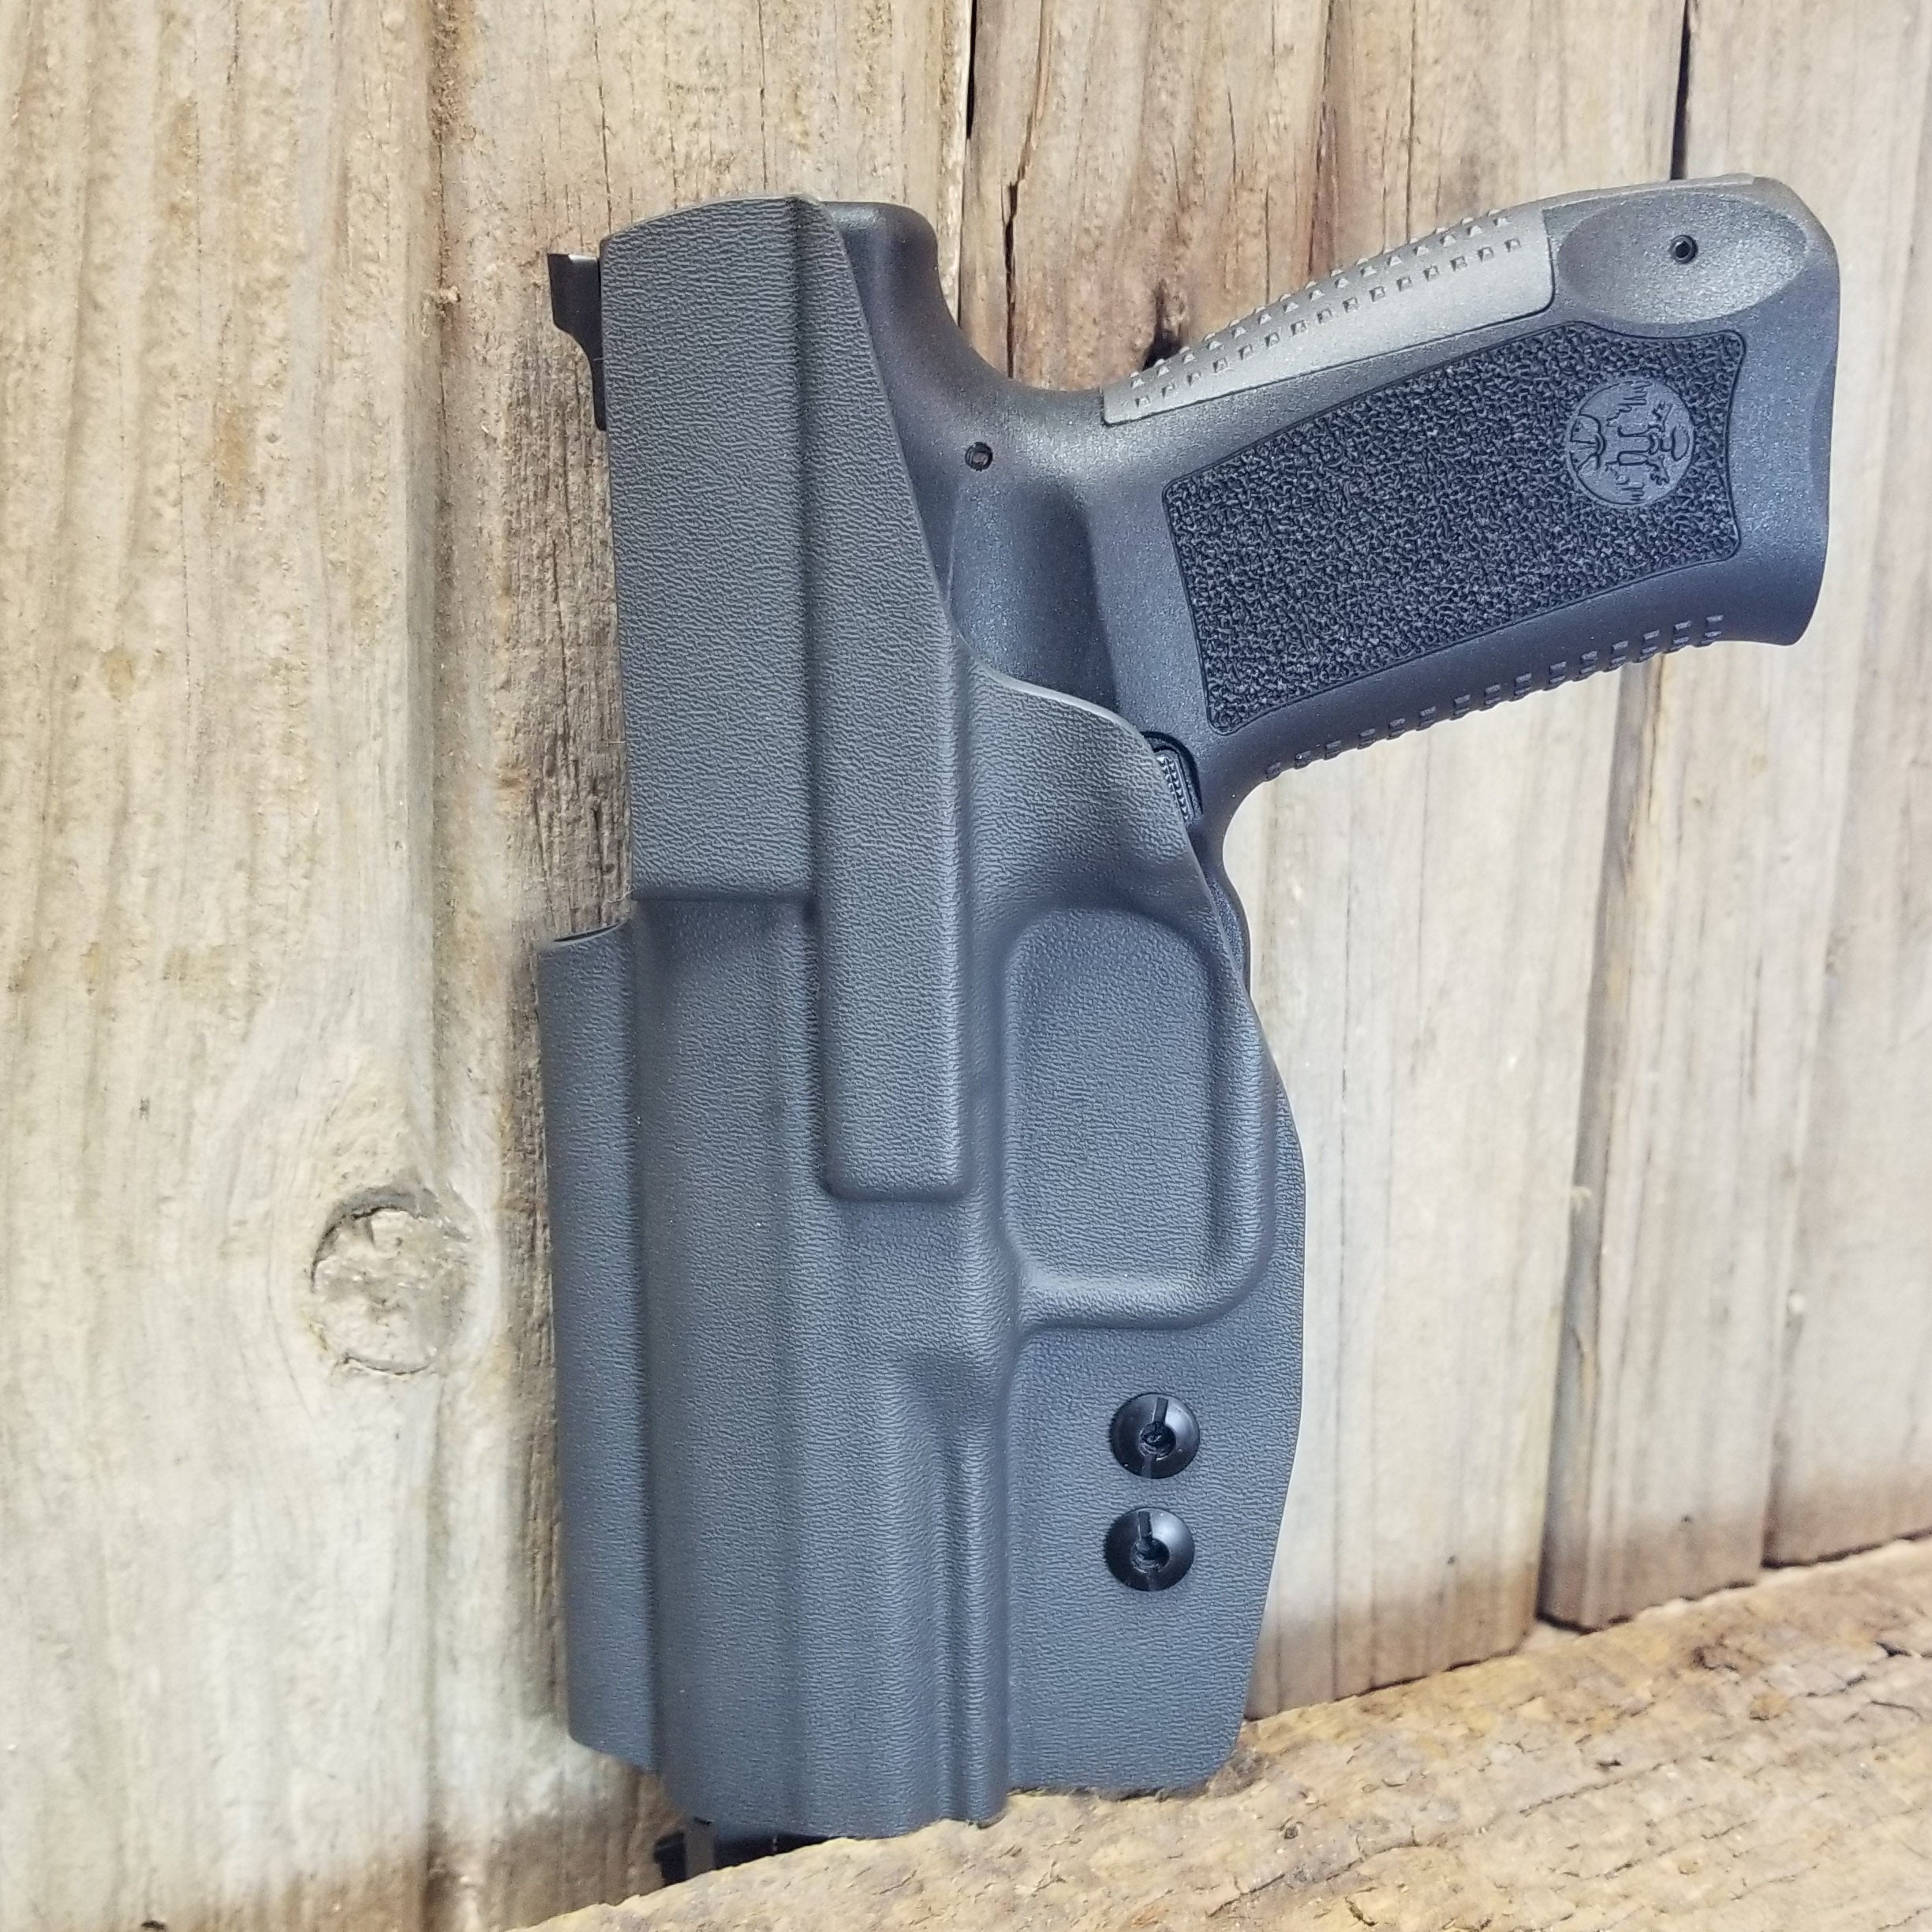 Inside Waistband Taco Style Holster for the Canik TP9 series of pistols. Holster test fit and retention is set using the TP9SFX. The holster mold is designed to allow all TP9 pistols to fit with correct retention and clearance for controls Adjustable retention High sweat guard standard, medium and low height available